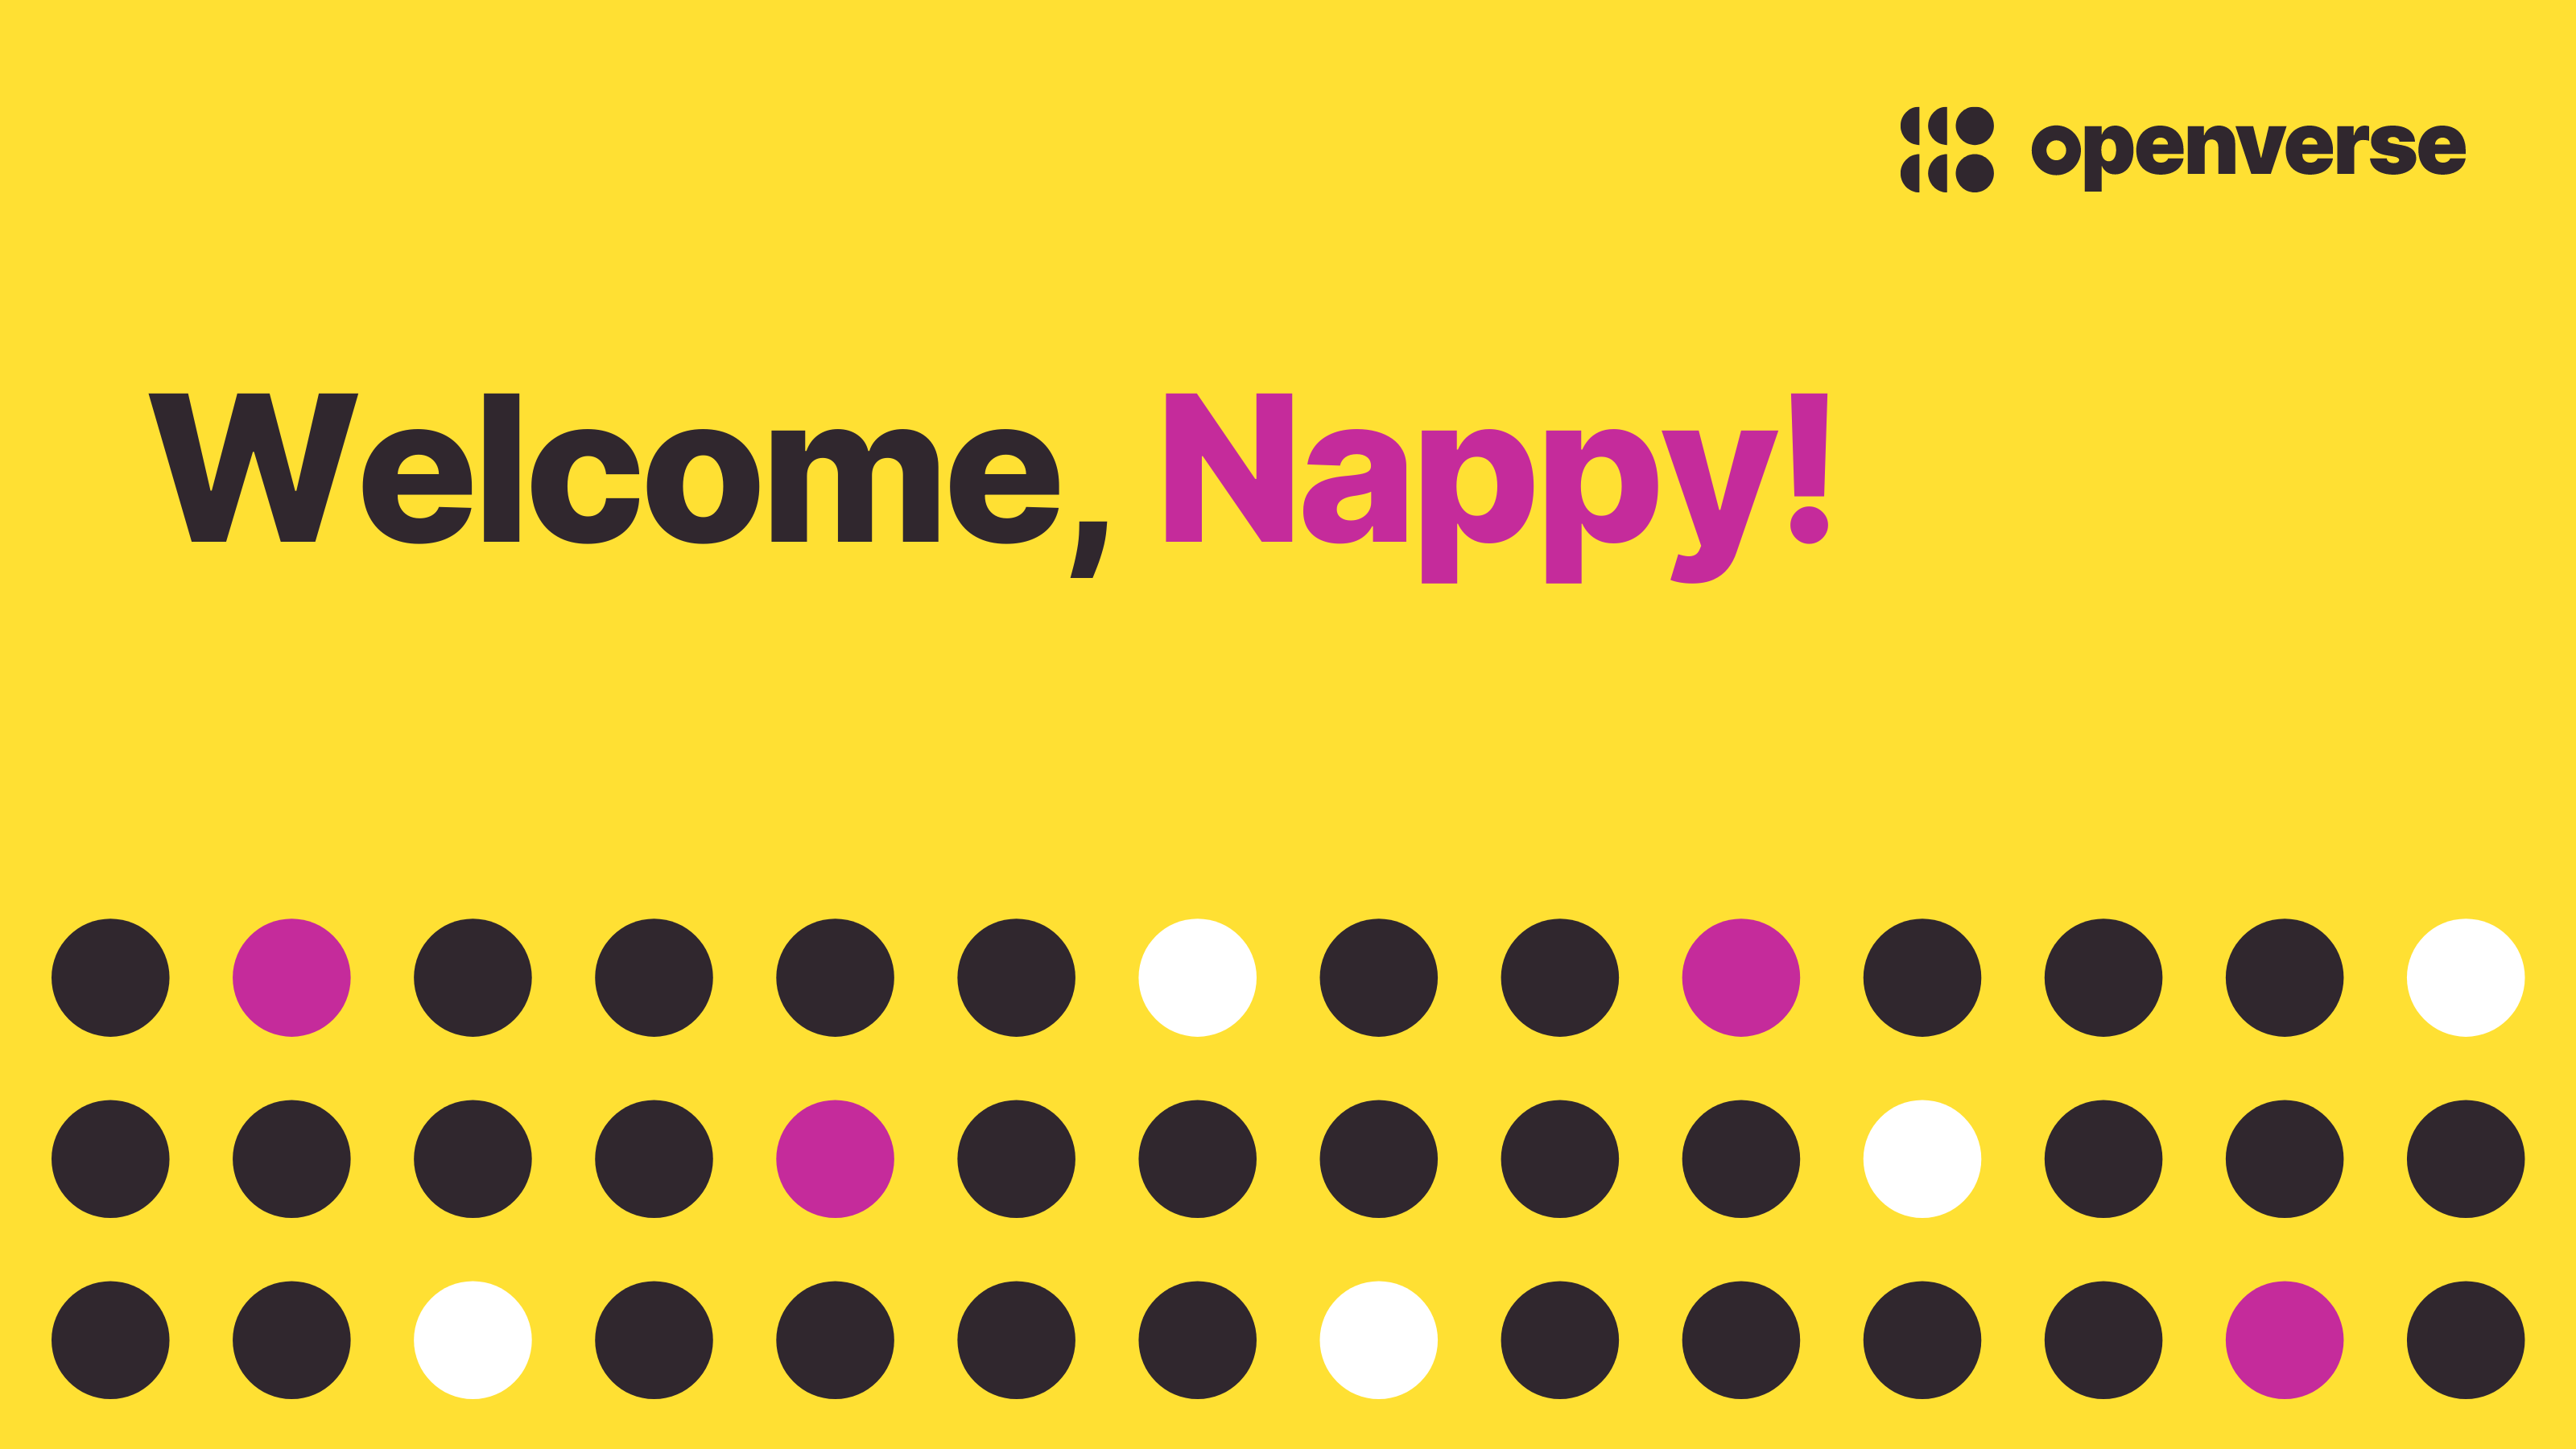 Decorative yellow background with Openverse logo and text, "Welcome, Nappy."